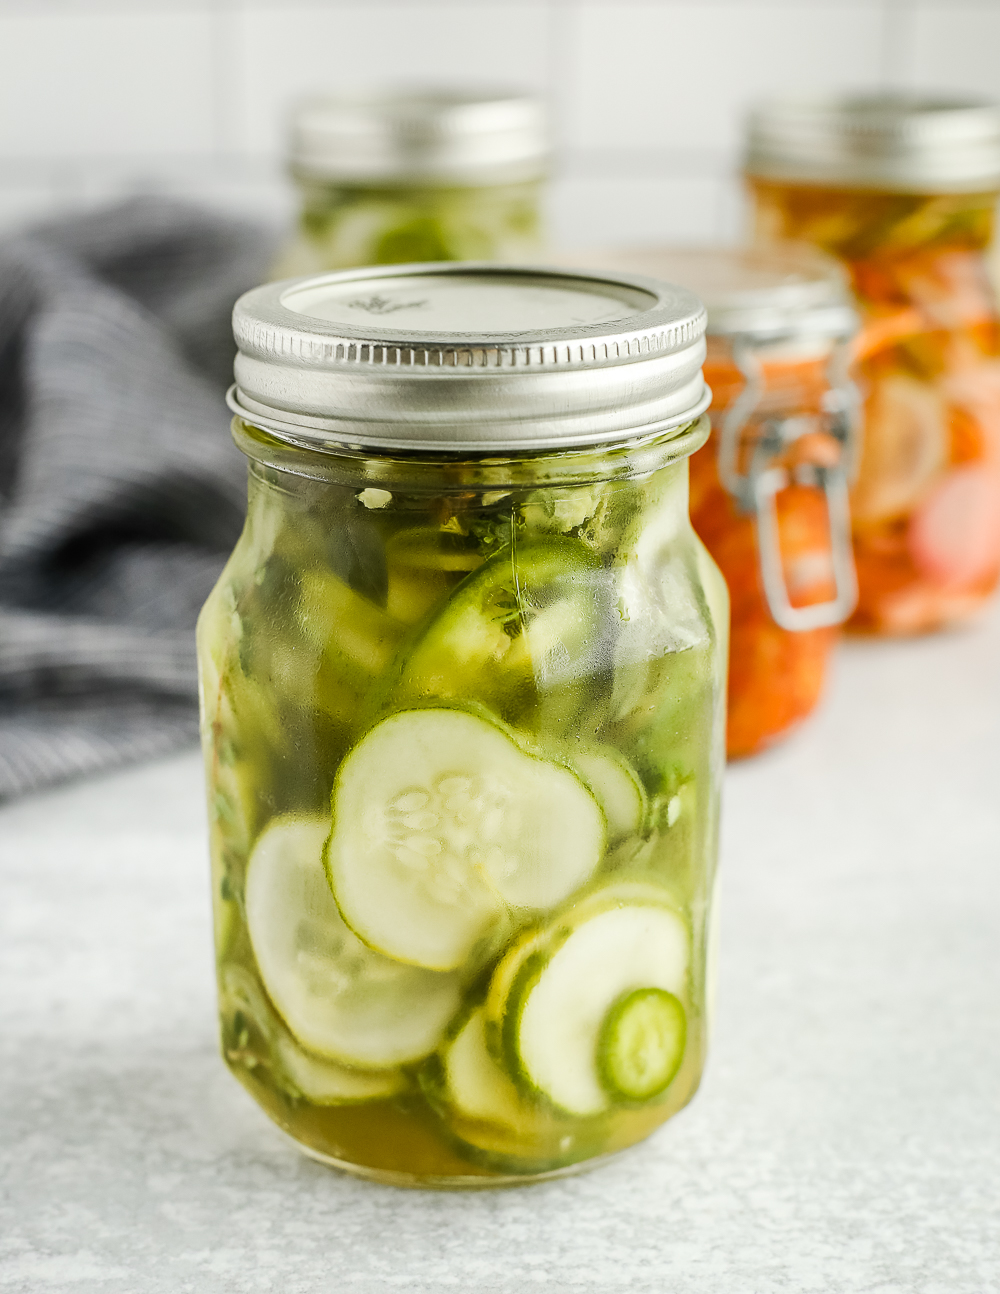 A clear glass jar filled with quick pickled cucumbers and onions with a silver lid, with other jars of various types of quick pickles in the background